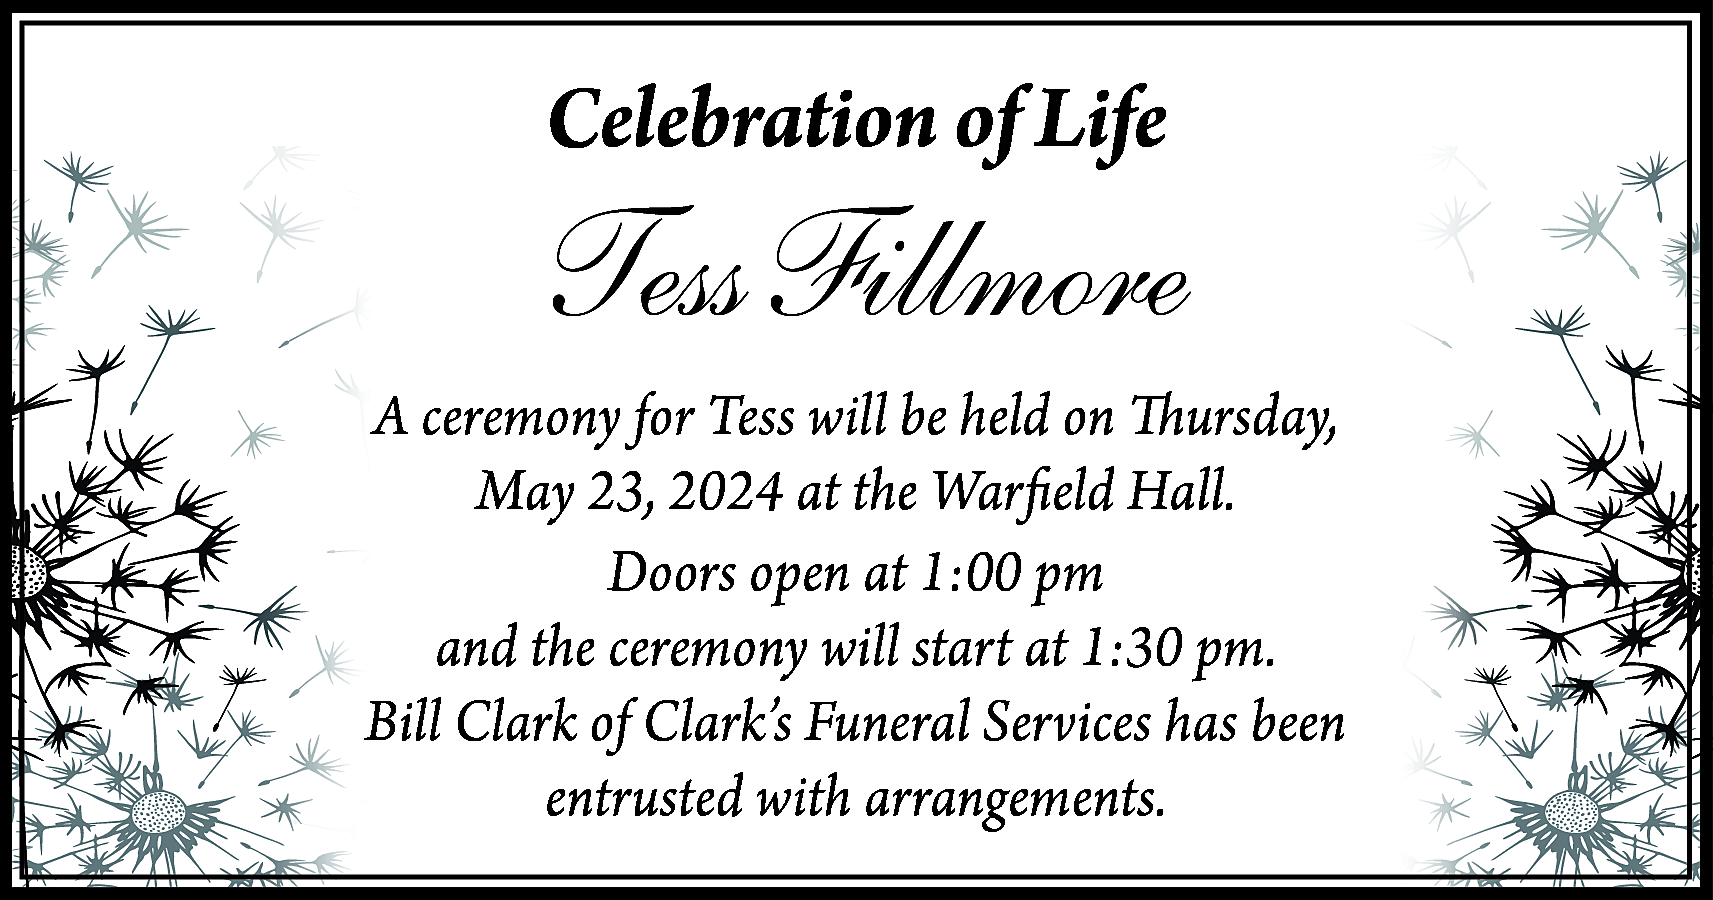 Celebration of Life <br> <br>Tess  Celebration of Life    Tess Fillmore    A ceremony for Tess will be held on Thursday,  May 23, 2024 at the Warfield Hall.  Doors open at 1:00 pm  and the ceremony will start at 1:30 pm.  Bill Clark of Clark’s Funeral Services has been  entrusted with arrangements.    